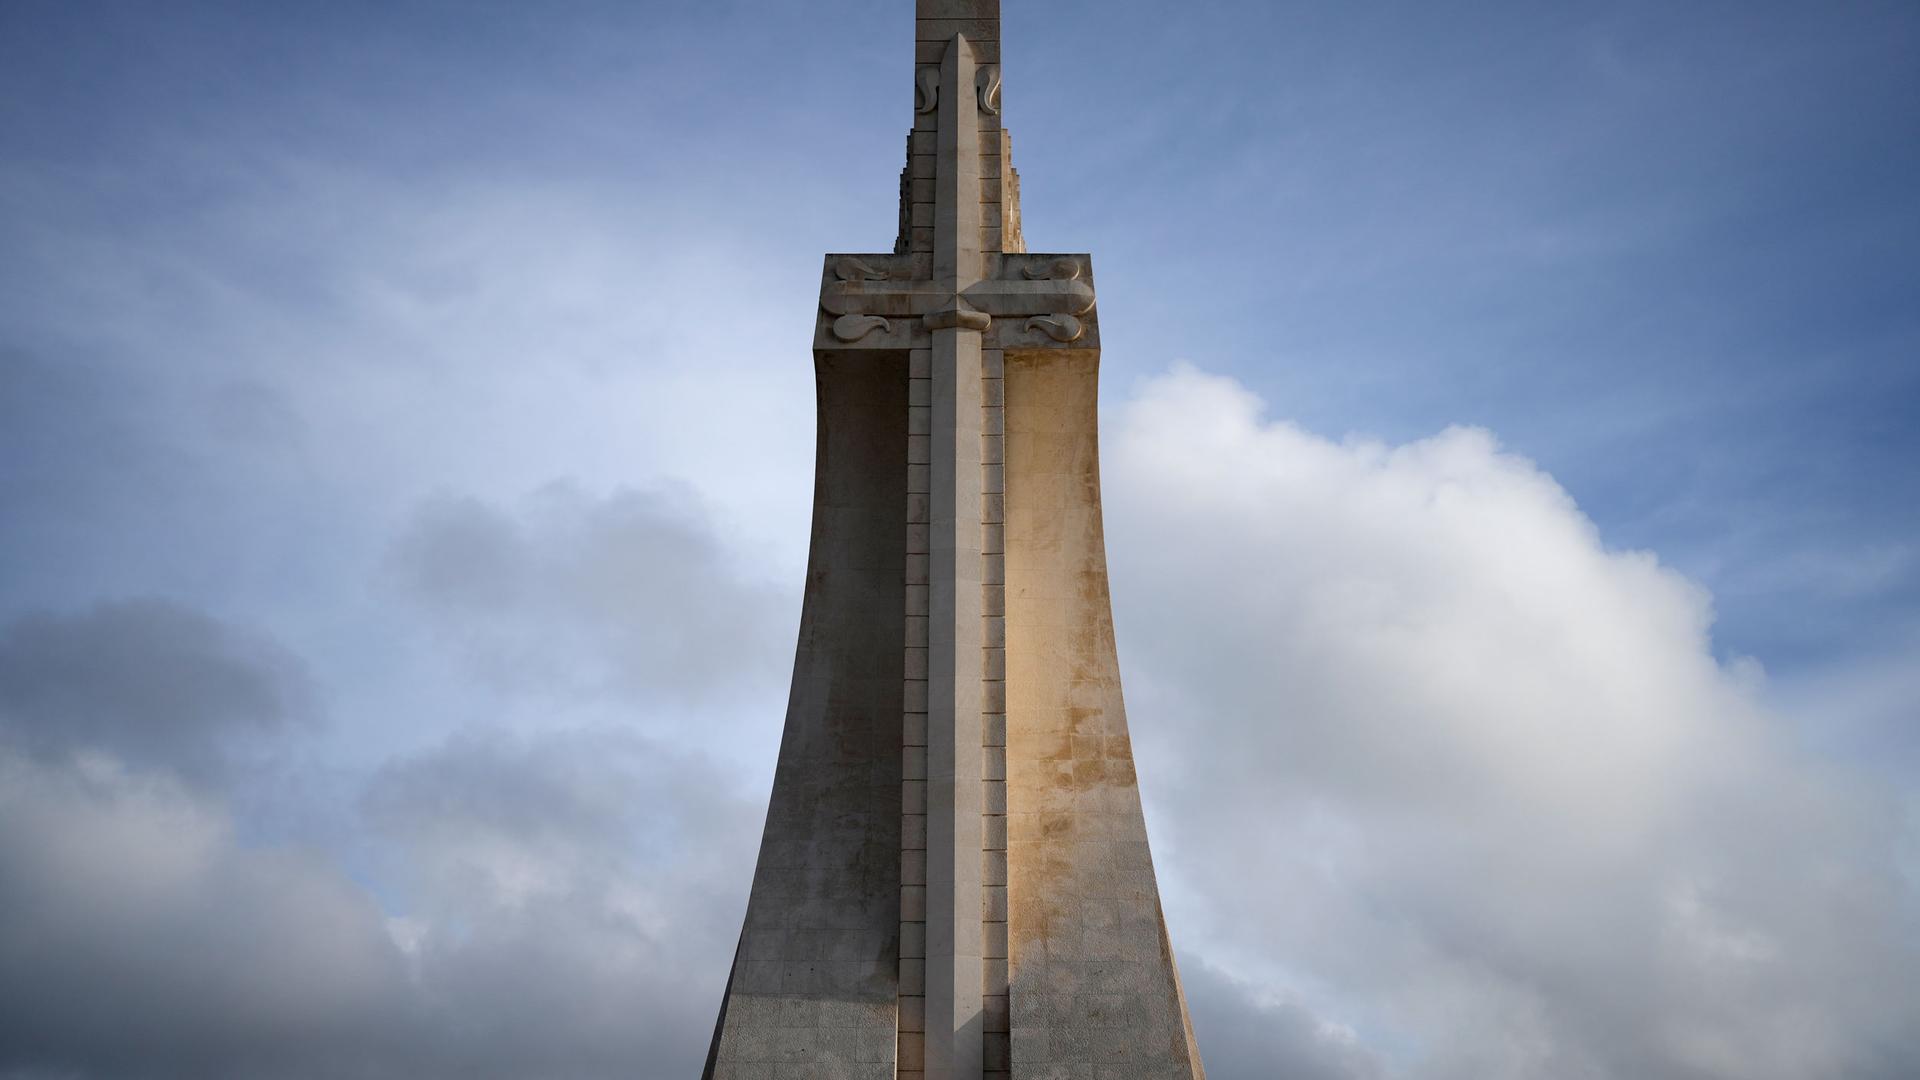 The sword of the Royal House of Avis on a stylized cross decorates the 56-meter high Monument to the Discoveries by the Tagus river in Lisbon, Thursday, March 30, 2023. 